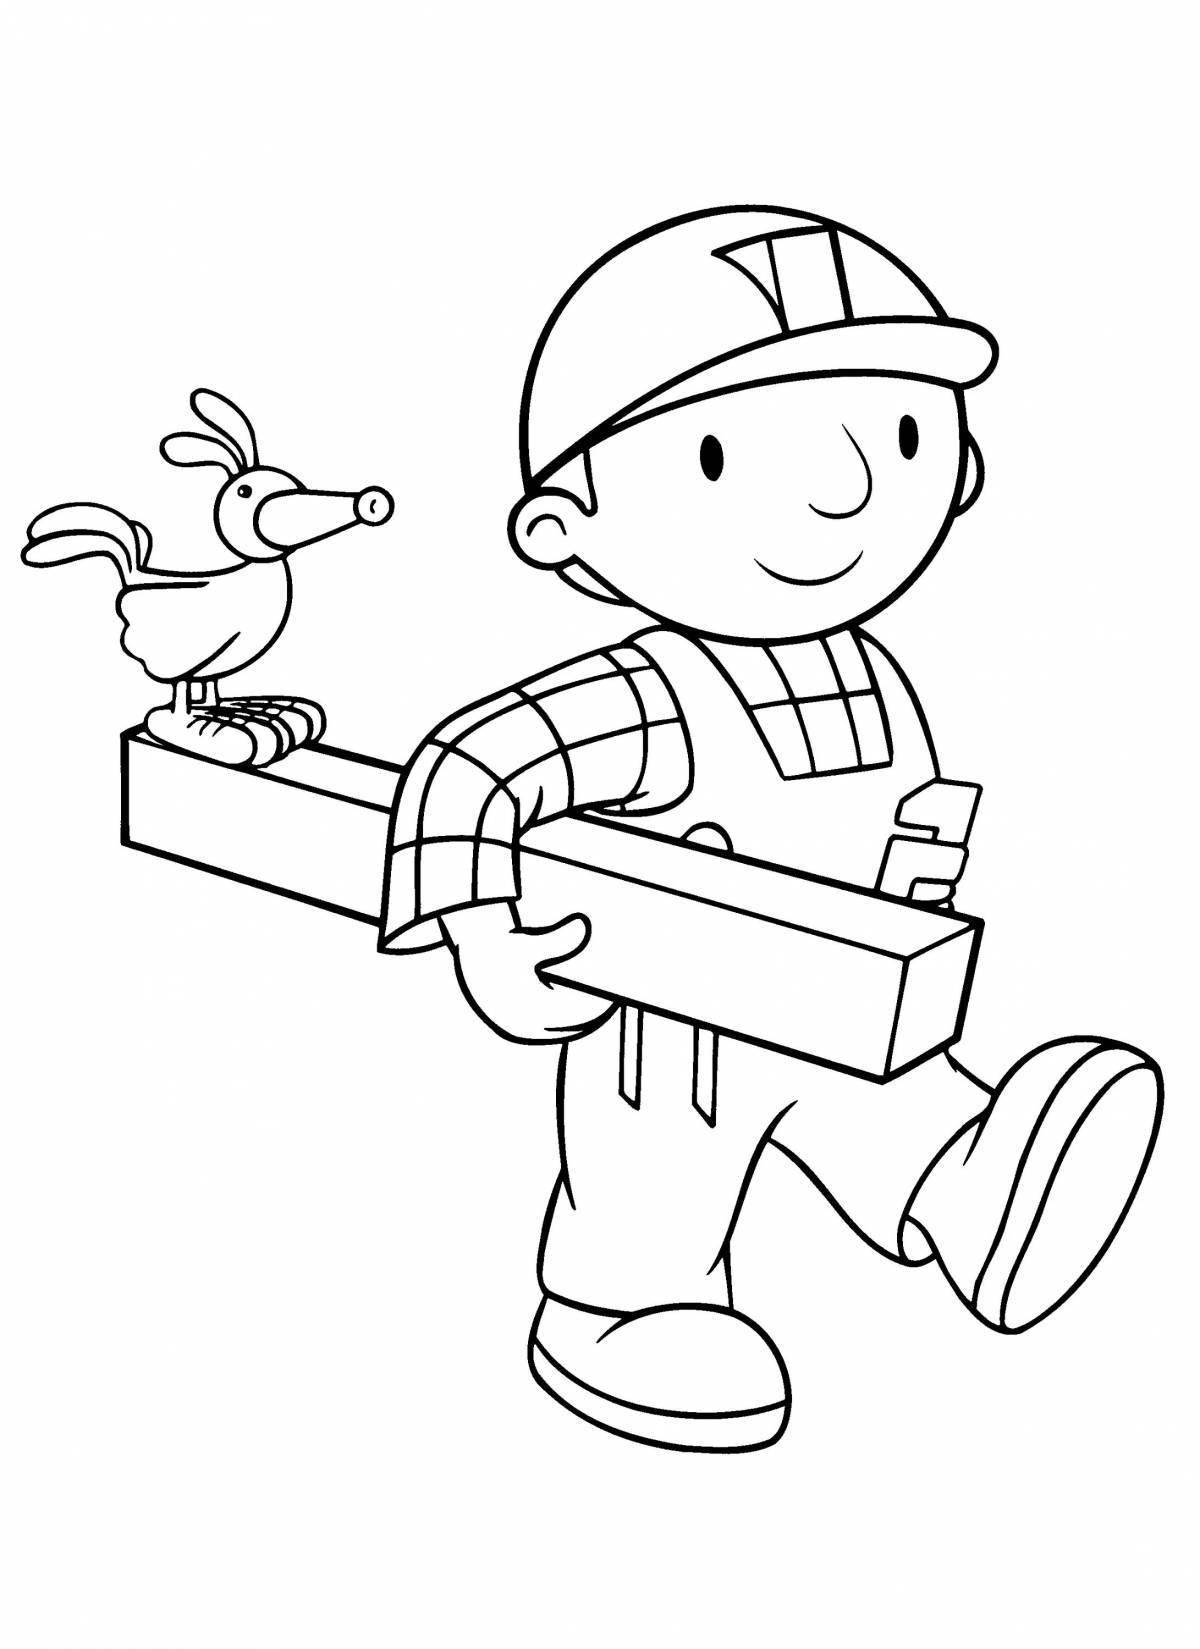 Occupational safety for children #5